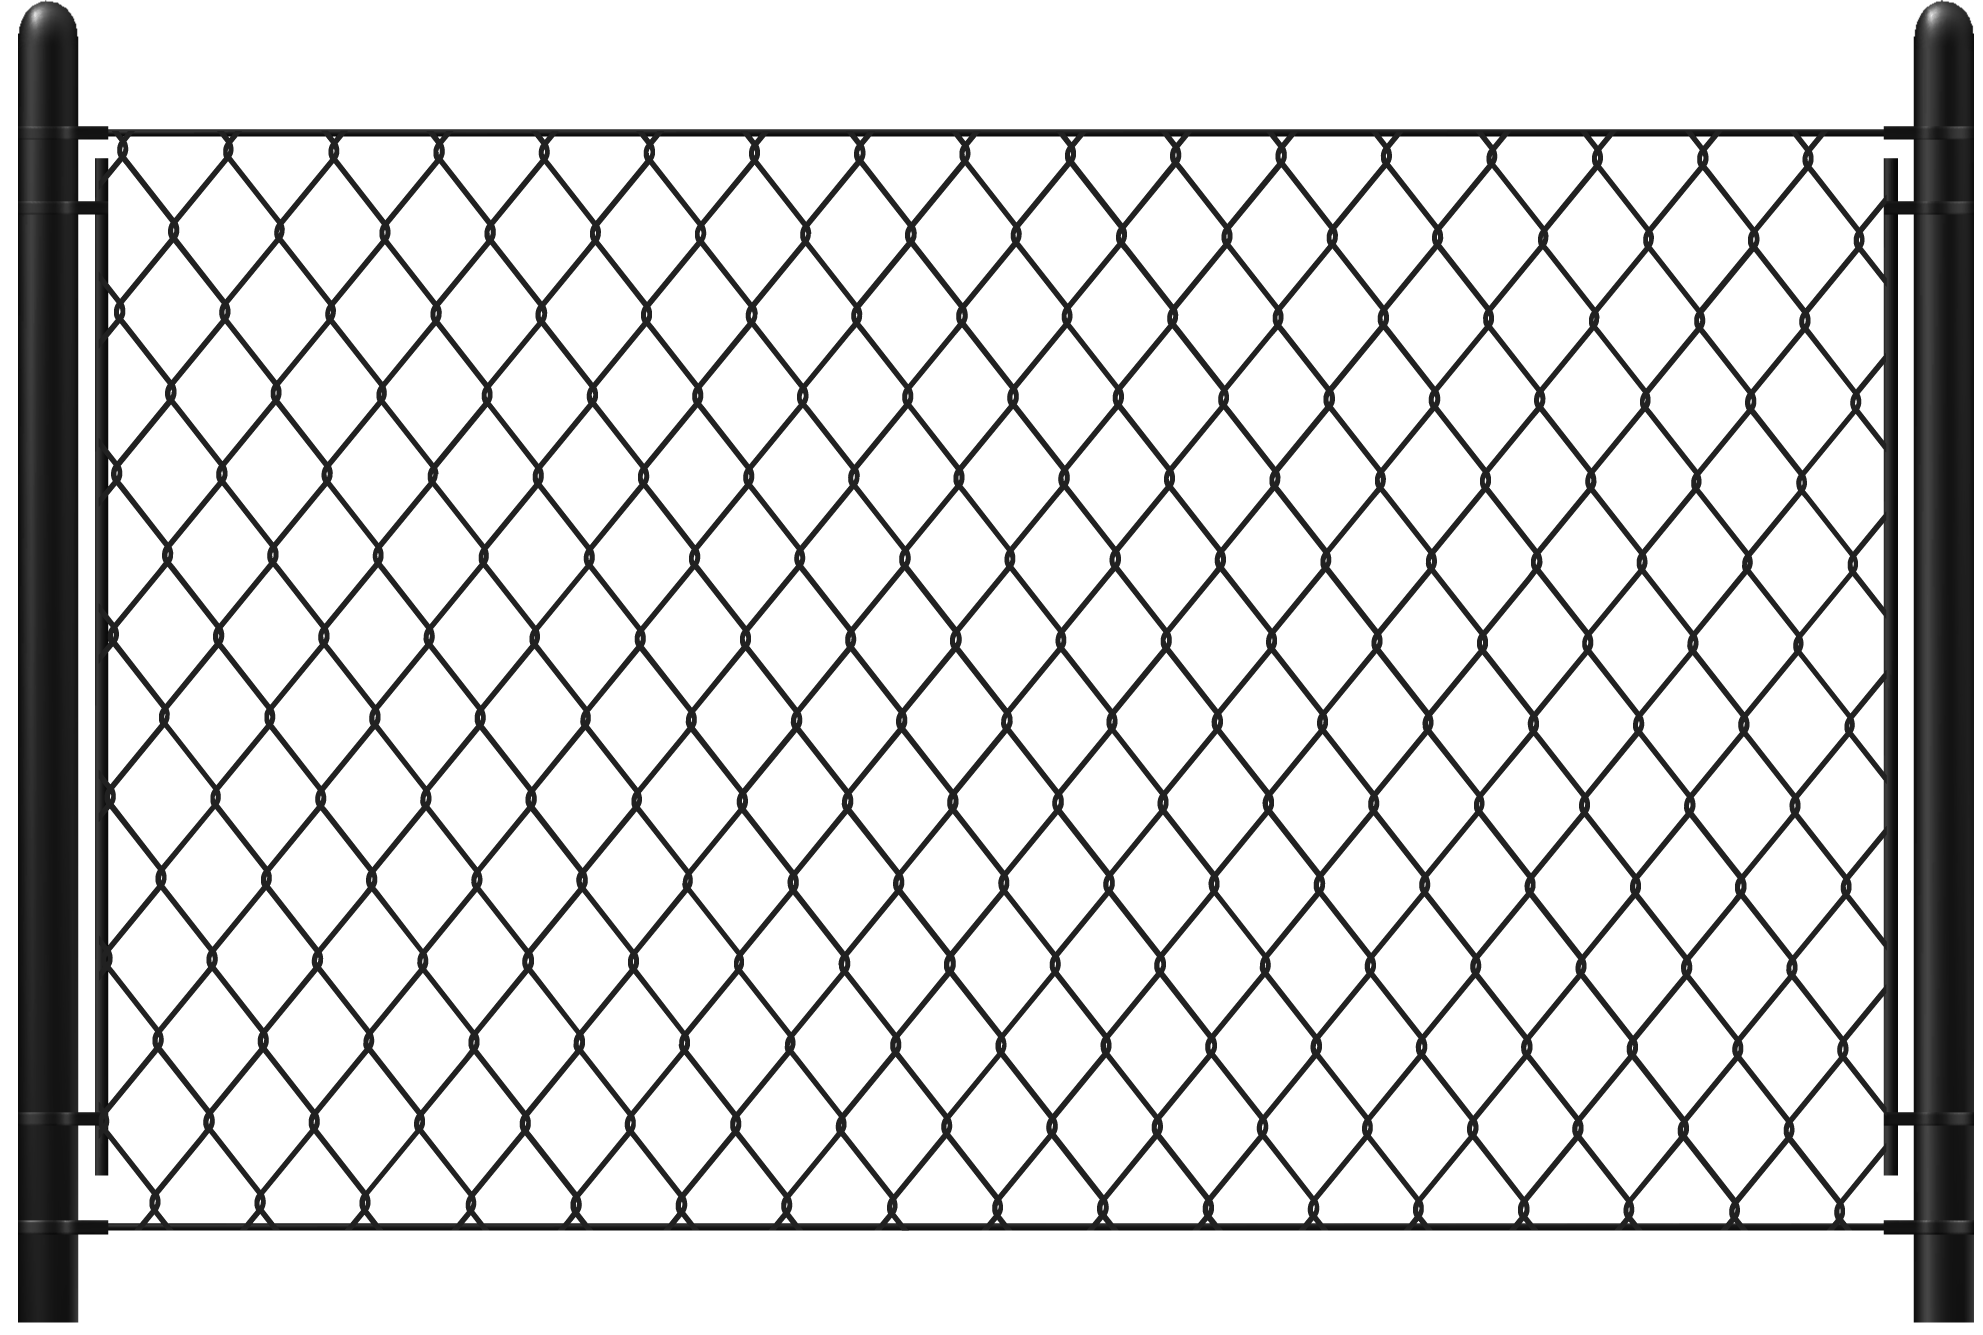 Wholesale Colored Vinyl Coated Chain-Link Fence for Sale in Southwest Florida